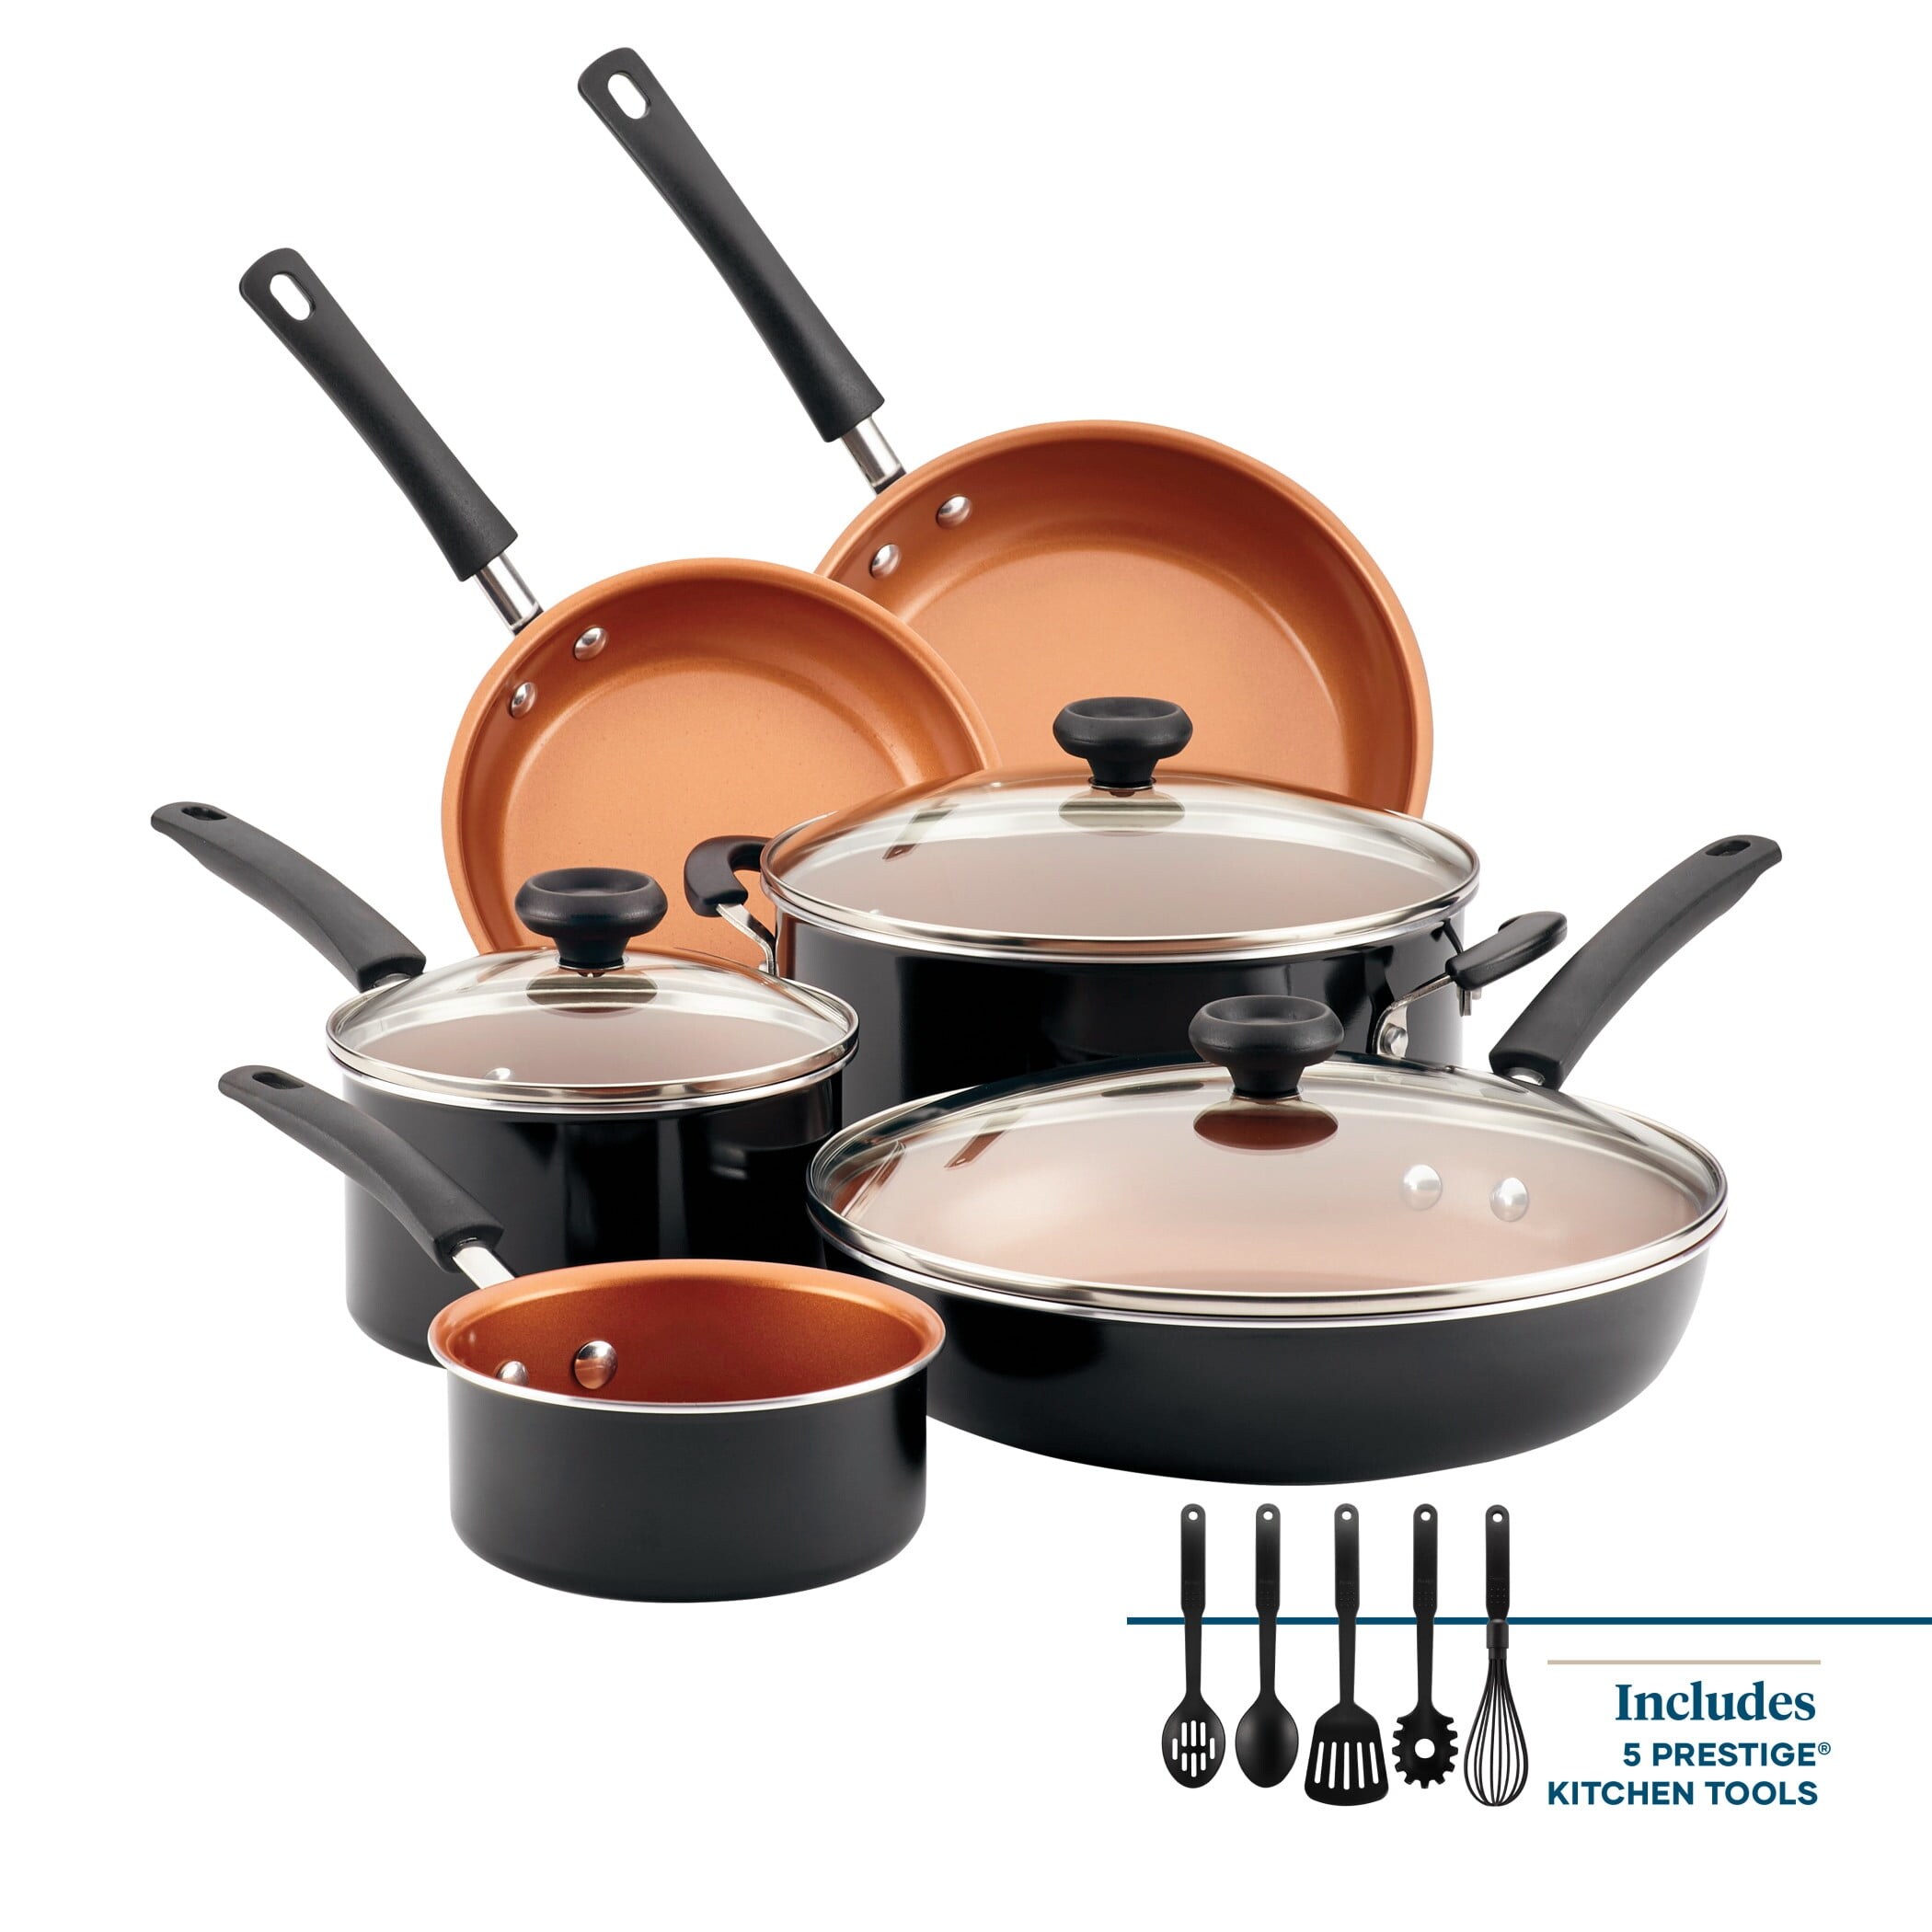 https://ak1.ostkcdn.com/images/products/is/images/direct/ccbe3ed524f8565691f0b89a125006558a612908/14-Piece-Easy-Clean-Pro-Ceramic-Nonstick-Cookware-Set%2C-Black.jpg